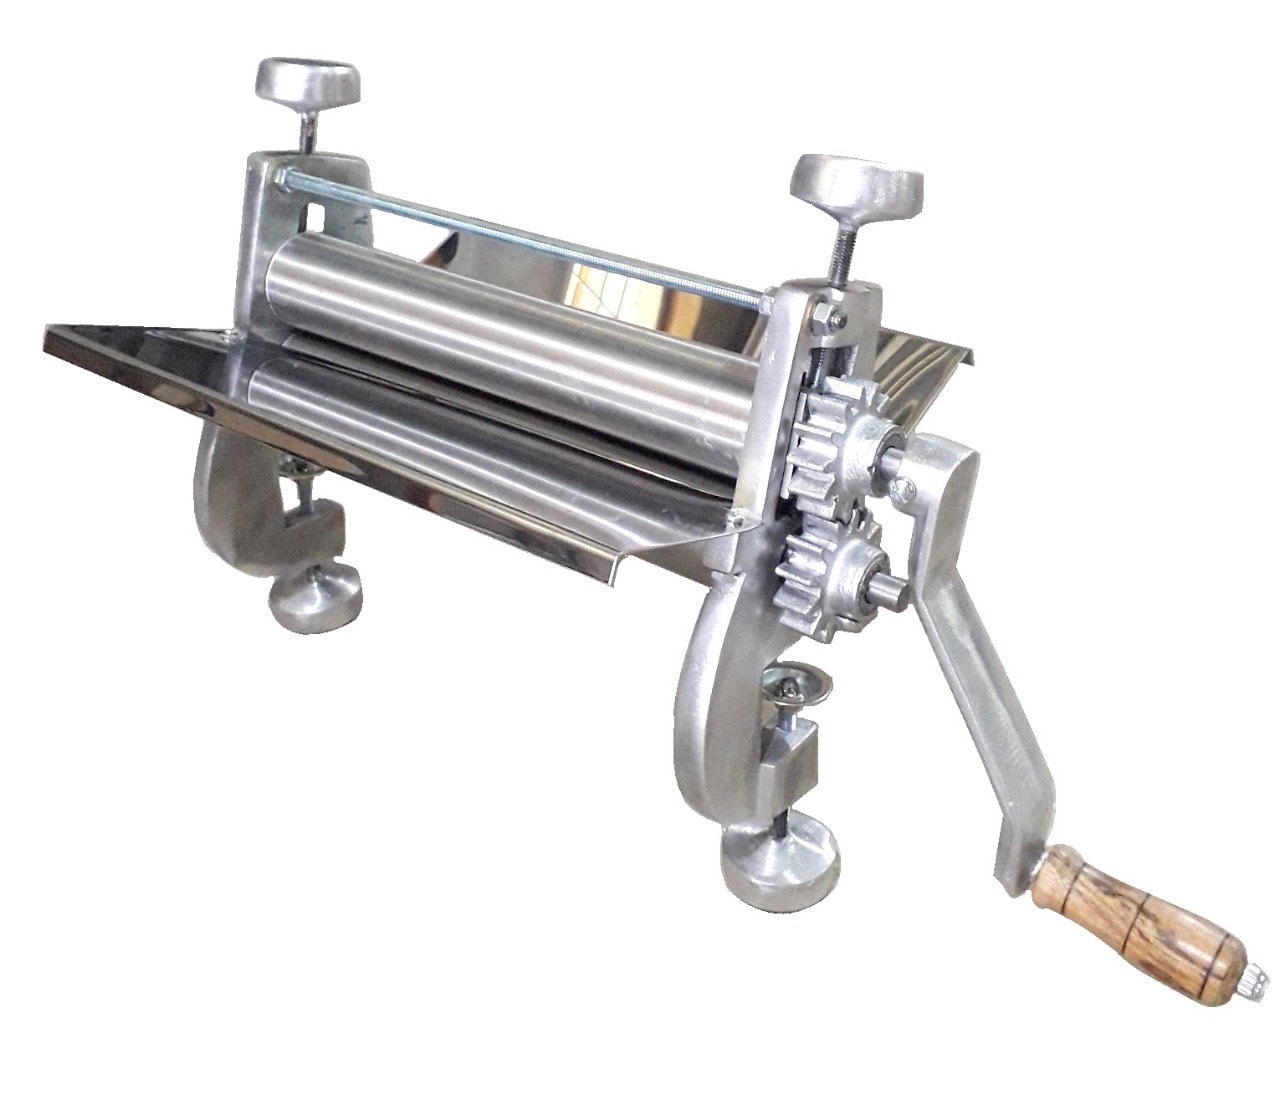 Baker's Craft Merchandising - Heavy Duty 1.5 Hp Dough Roller Machine - 4 x  16 Roller Size , Double Belt, Stainless Cover, and more Importantly Heavy  Duty Steel Stand - Optional Additional